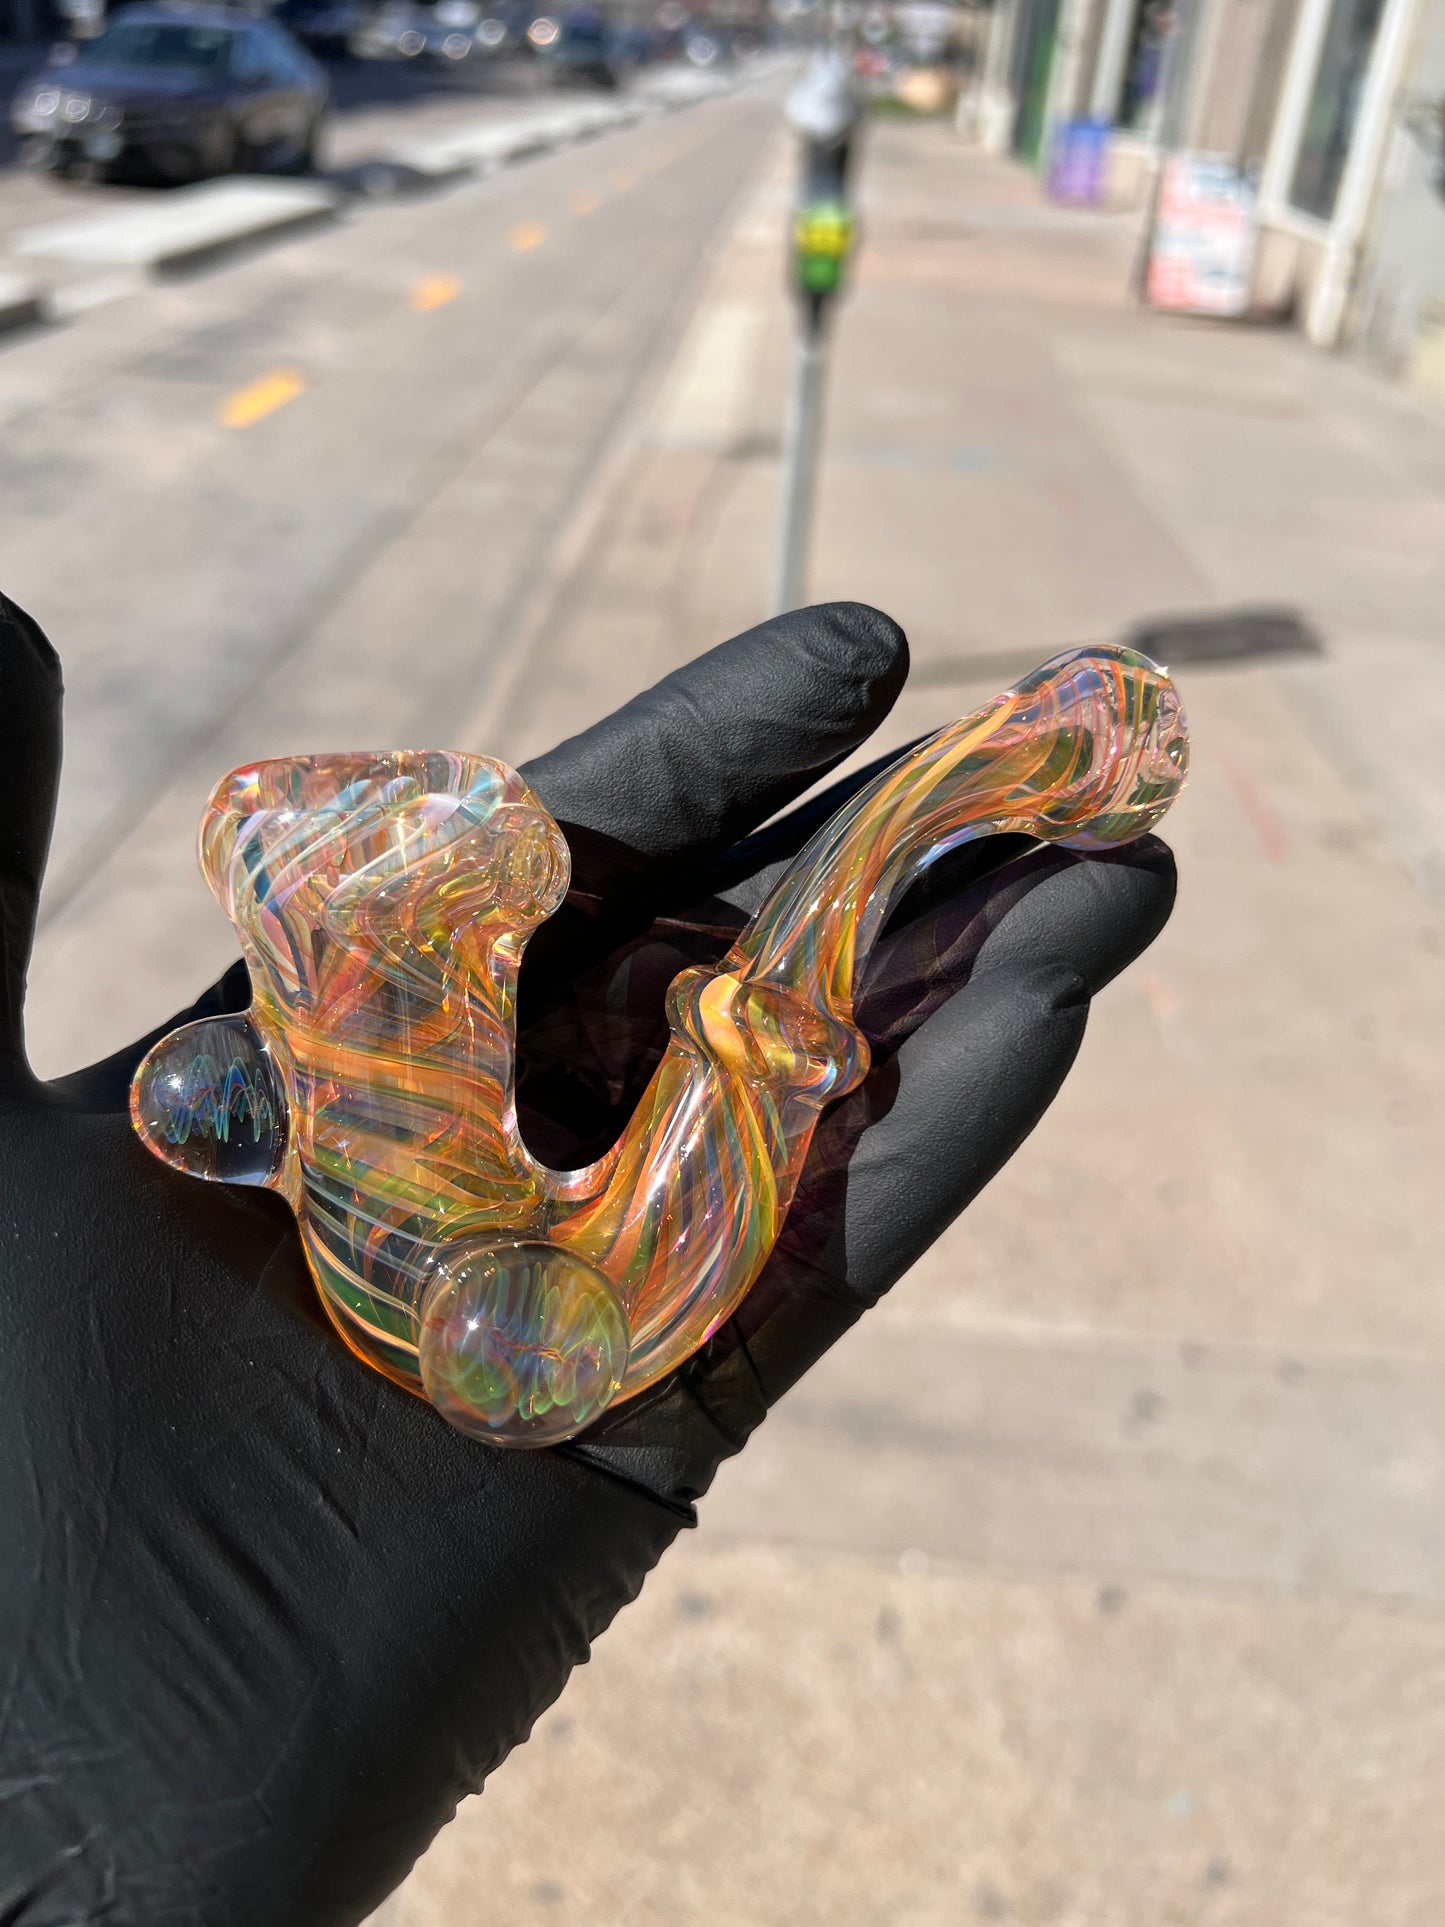 Fumed Sherlock with Mibs by Simon (Sigh Glass)